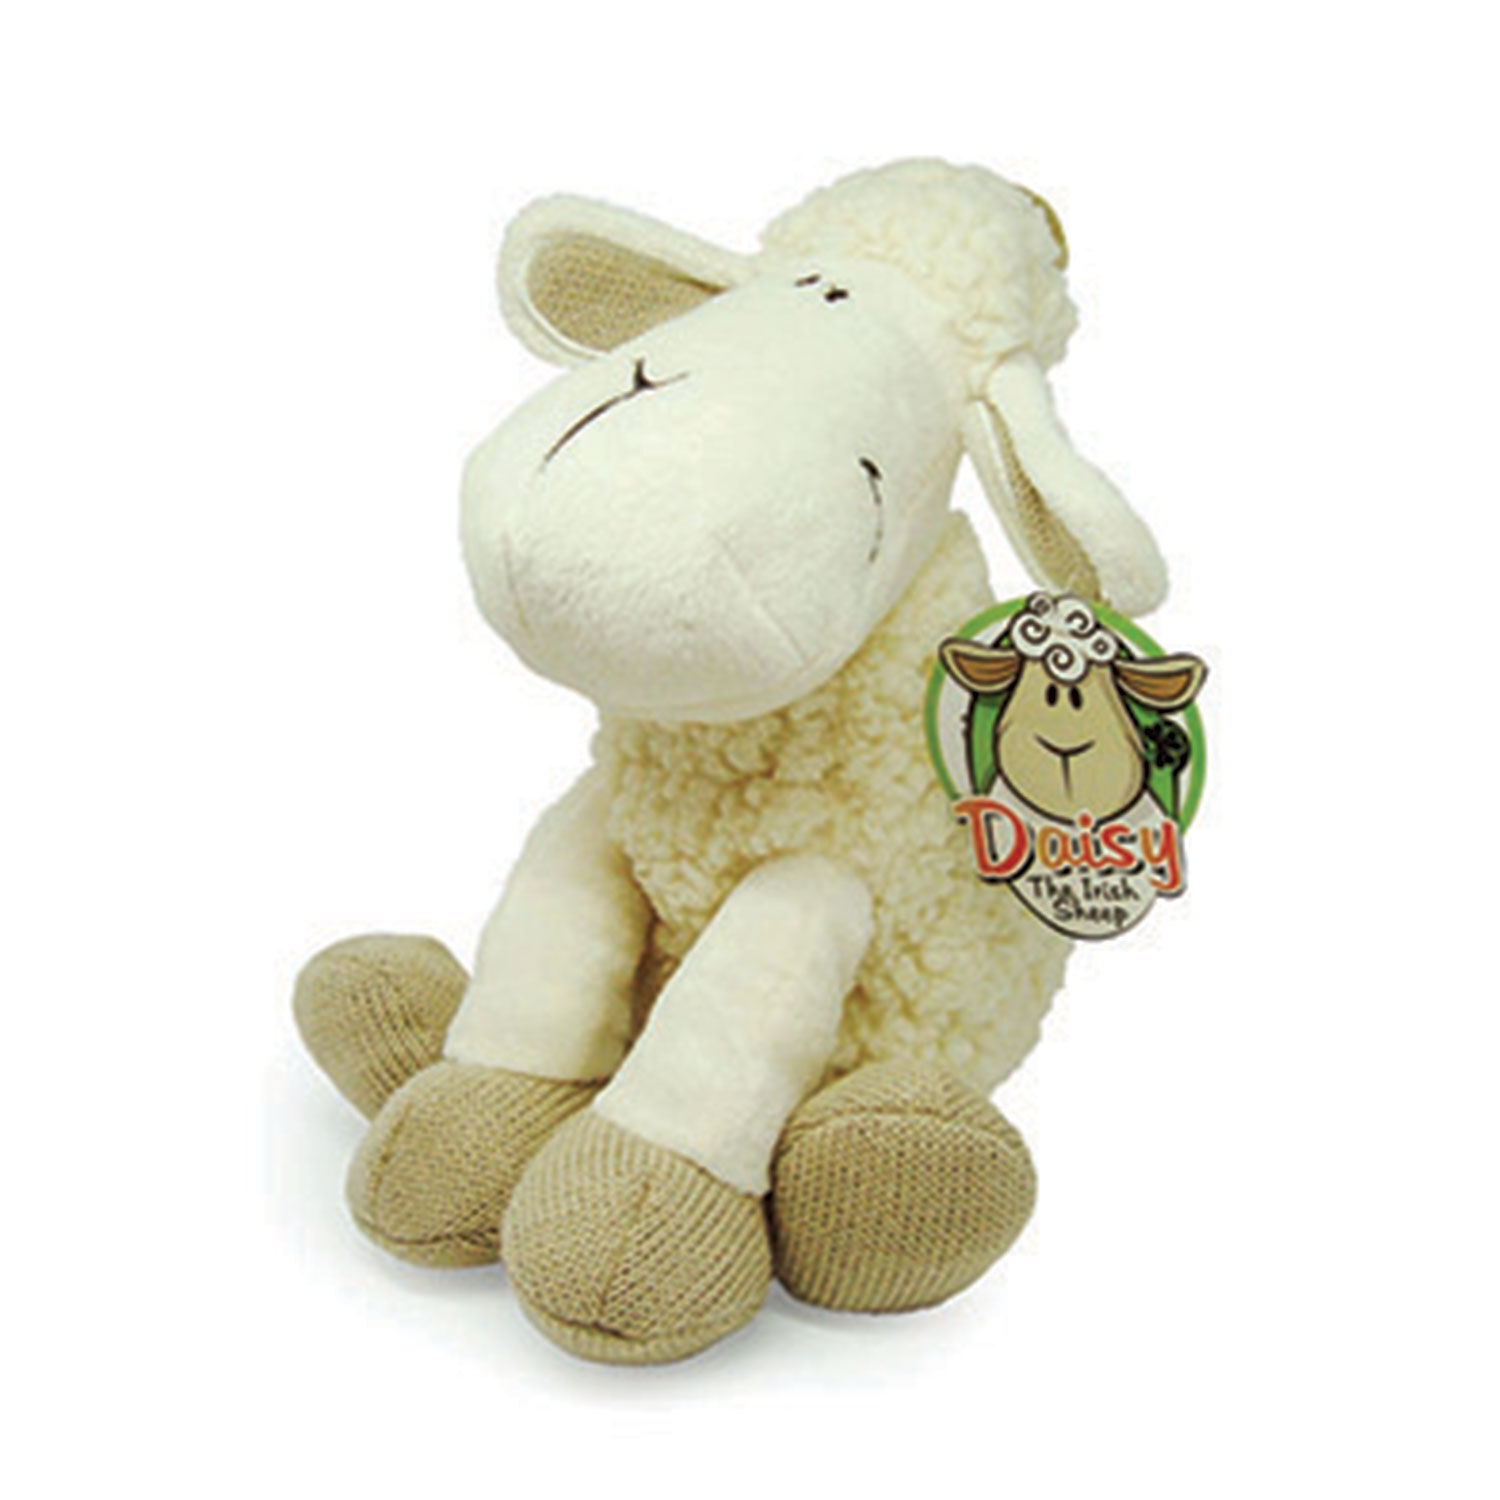 5” In Height And Cream And White Colour Daisy The Irish Sheep 